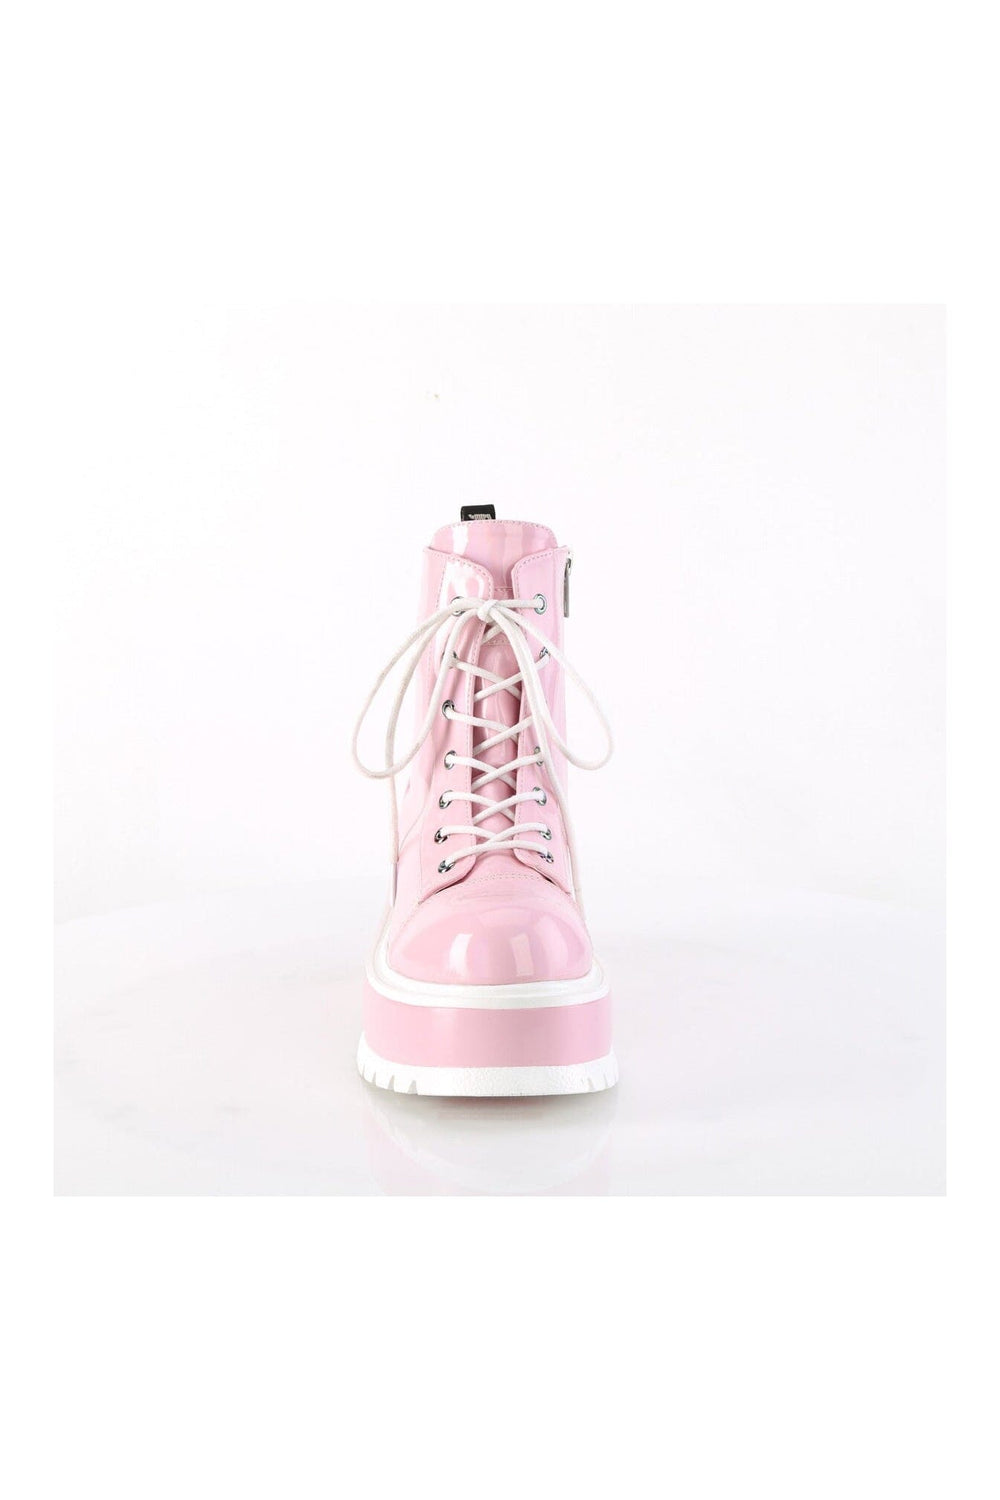 SLACKER-55 Pink Hologram Patent Ankle Boot-Ankle Boots-Demonia-SEXYSHOES.COM